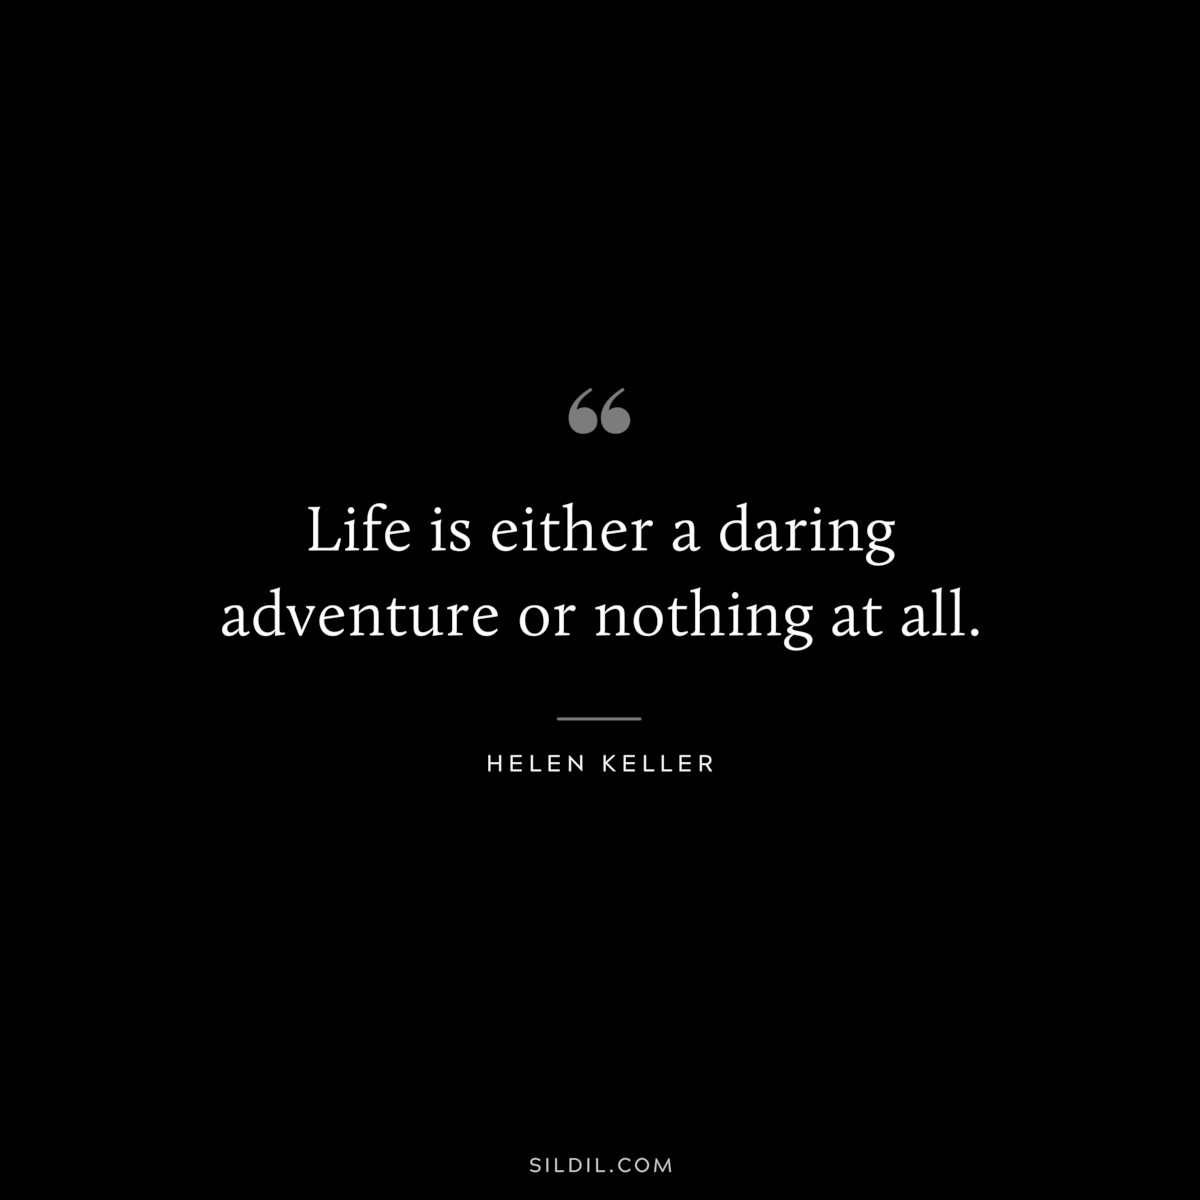 Life is either a daring adventure or nothing at all. ― Helen Keller